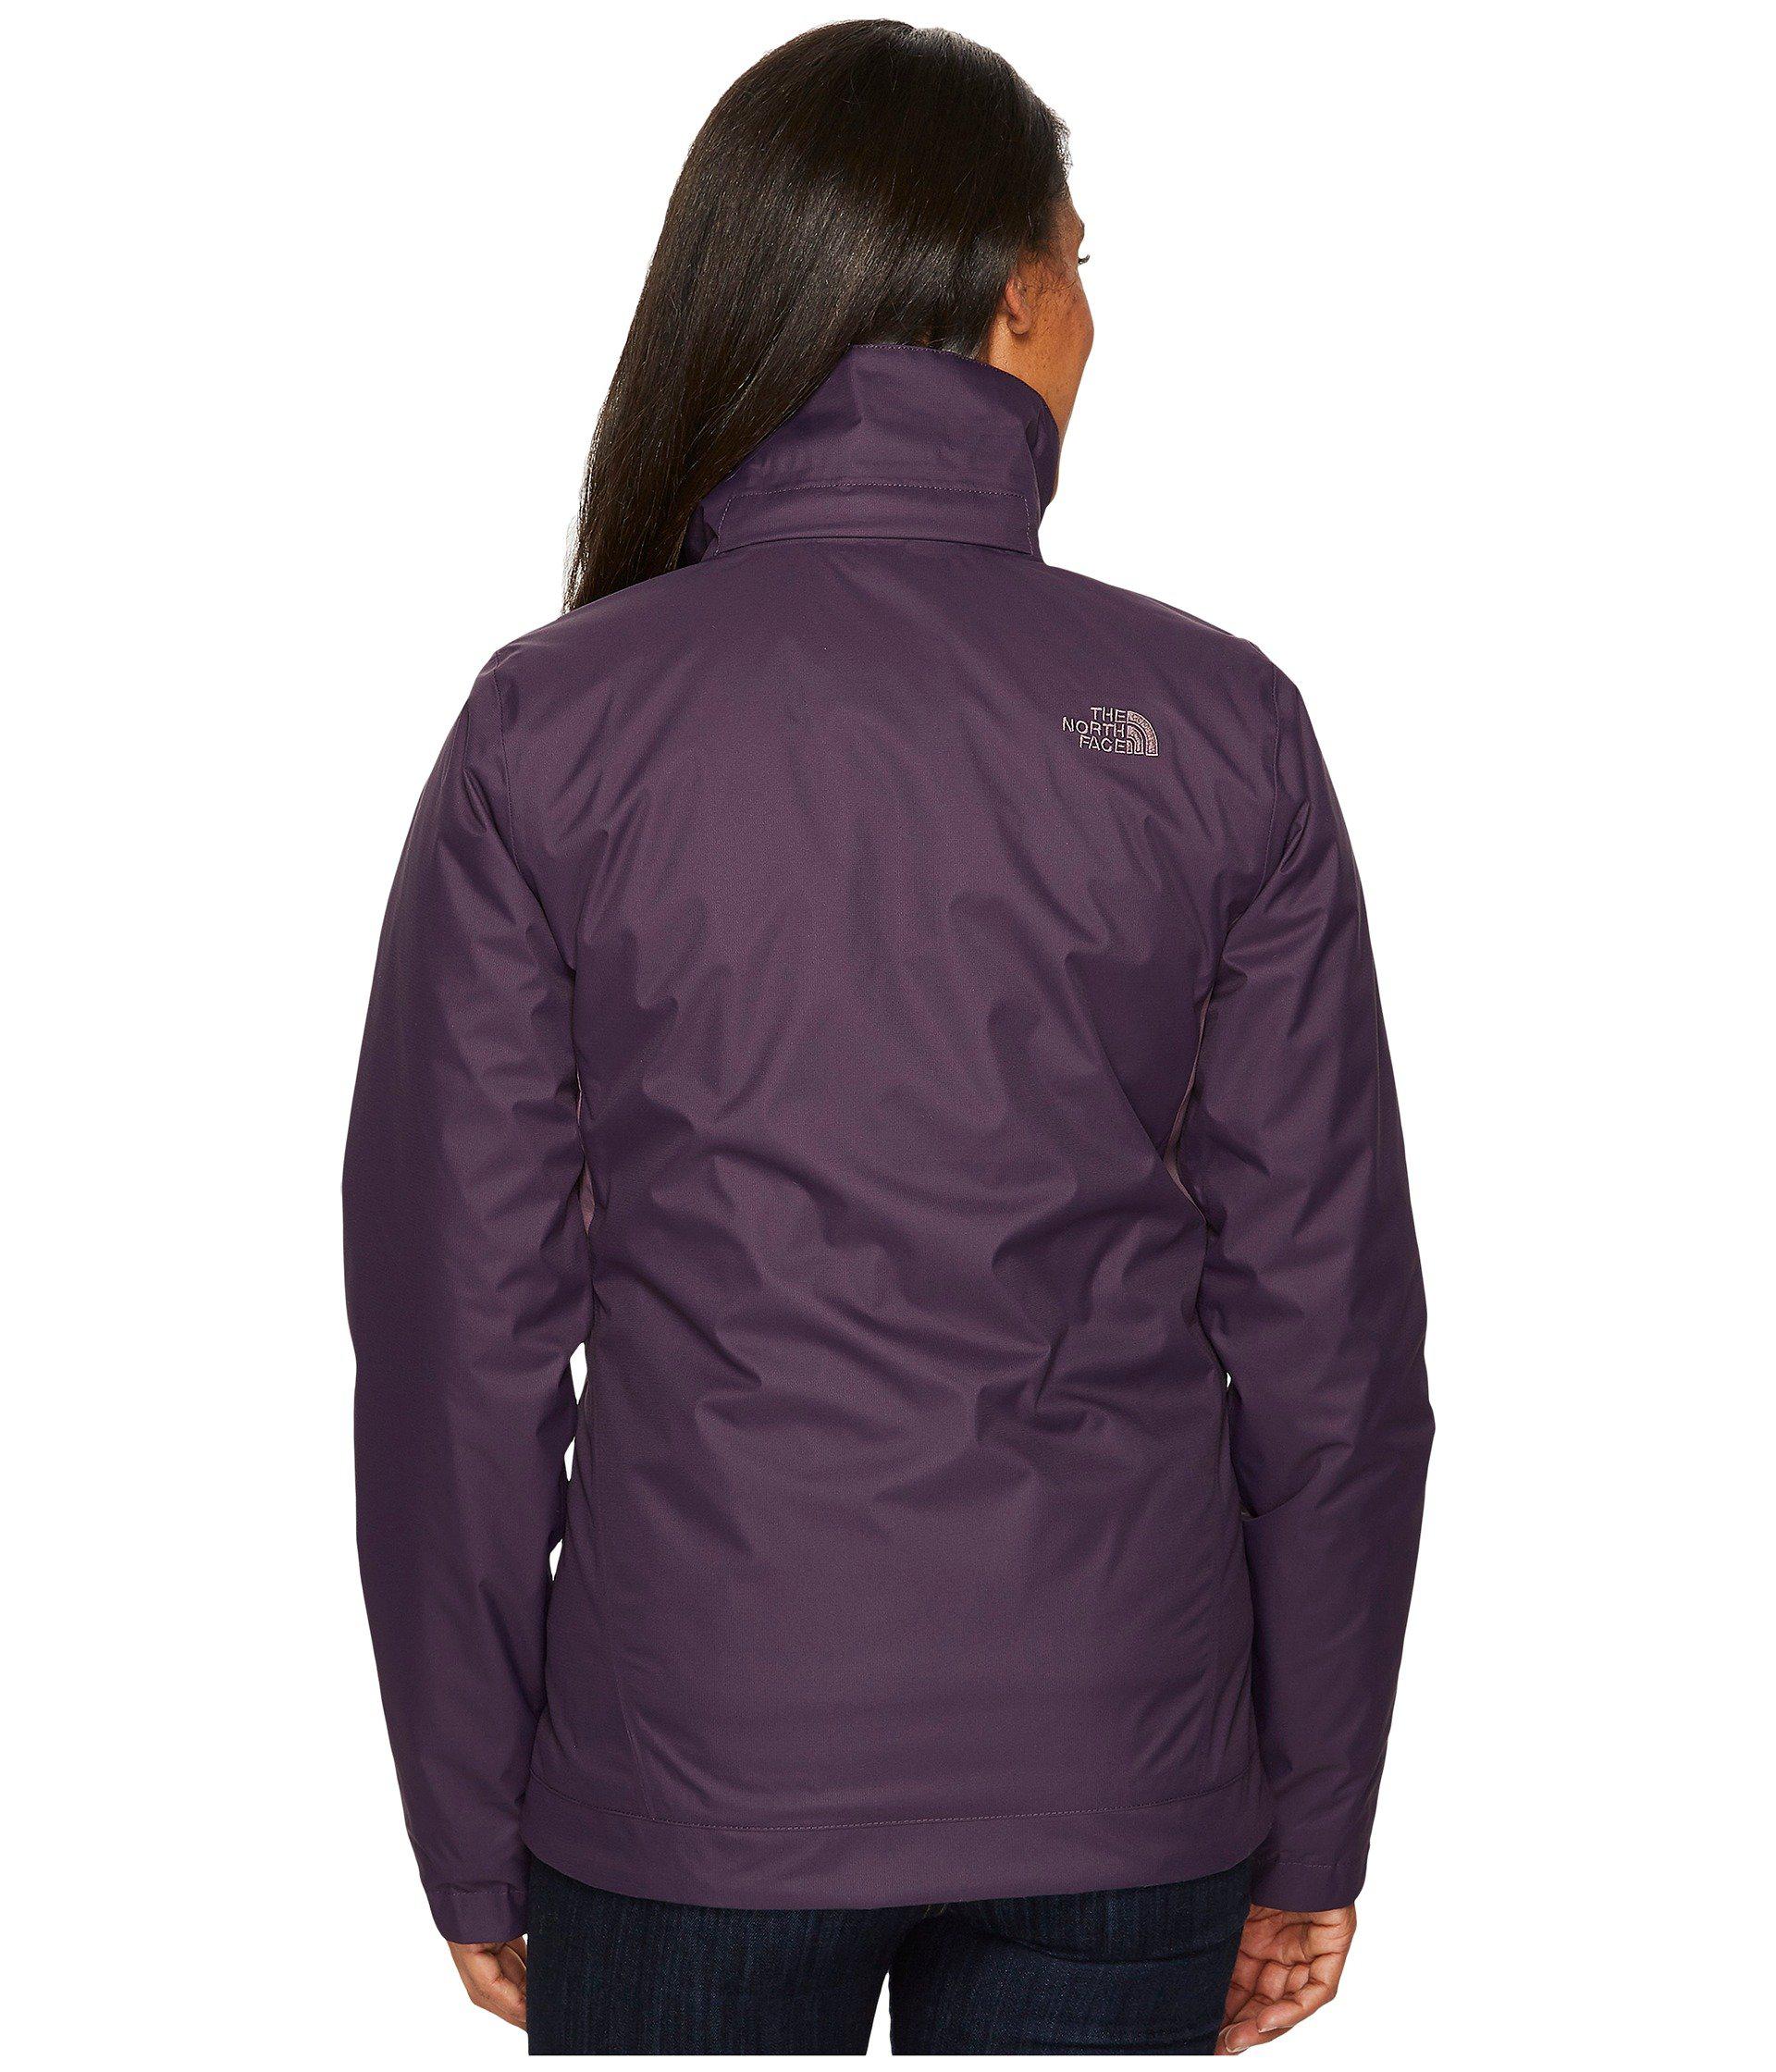 north face mossbud swirl triclimate jacket